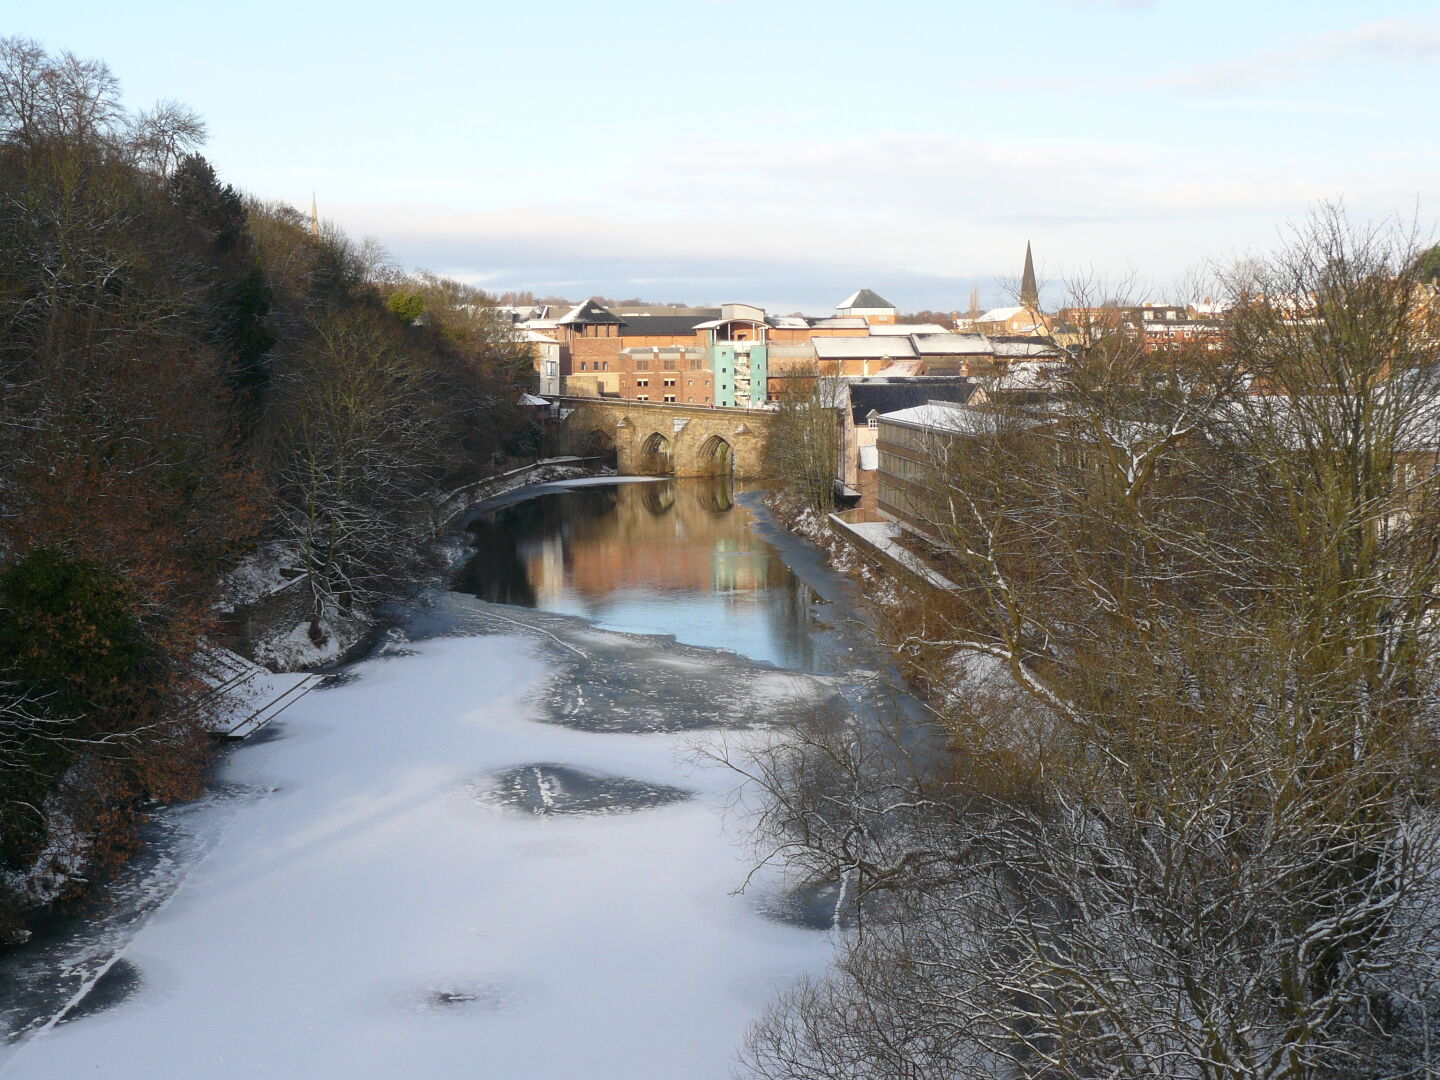 Durham seems to sleep under the snow (but the quiet is probably due to the fact that most students have left the town for the Christmas holidays).